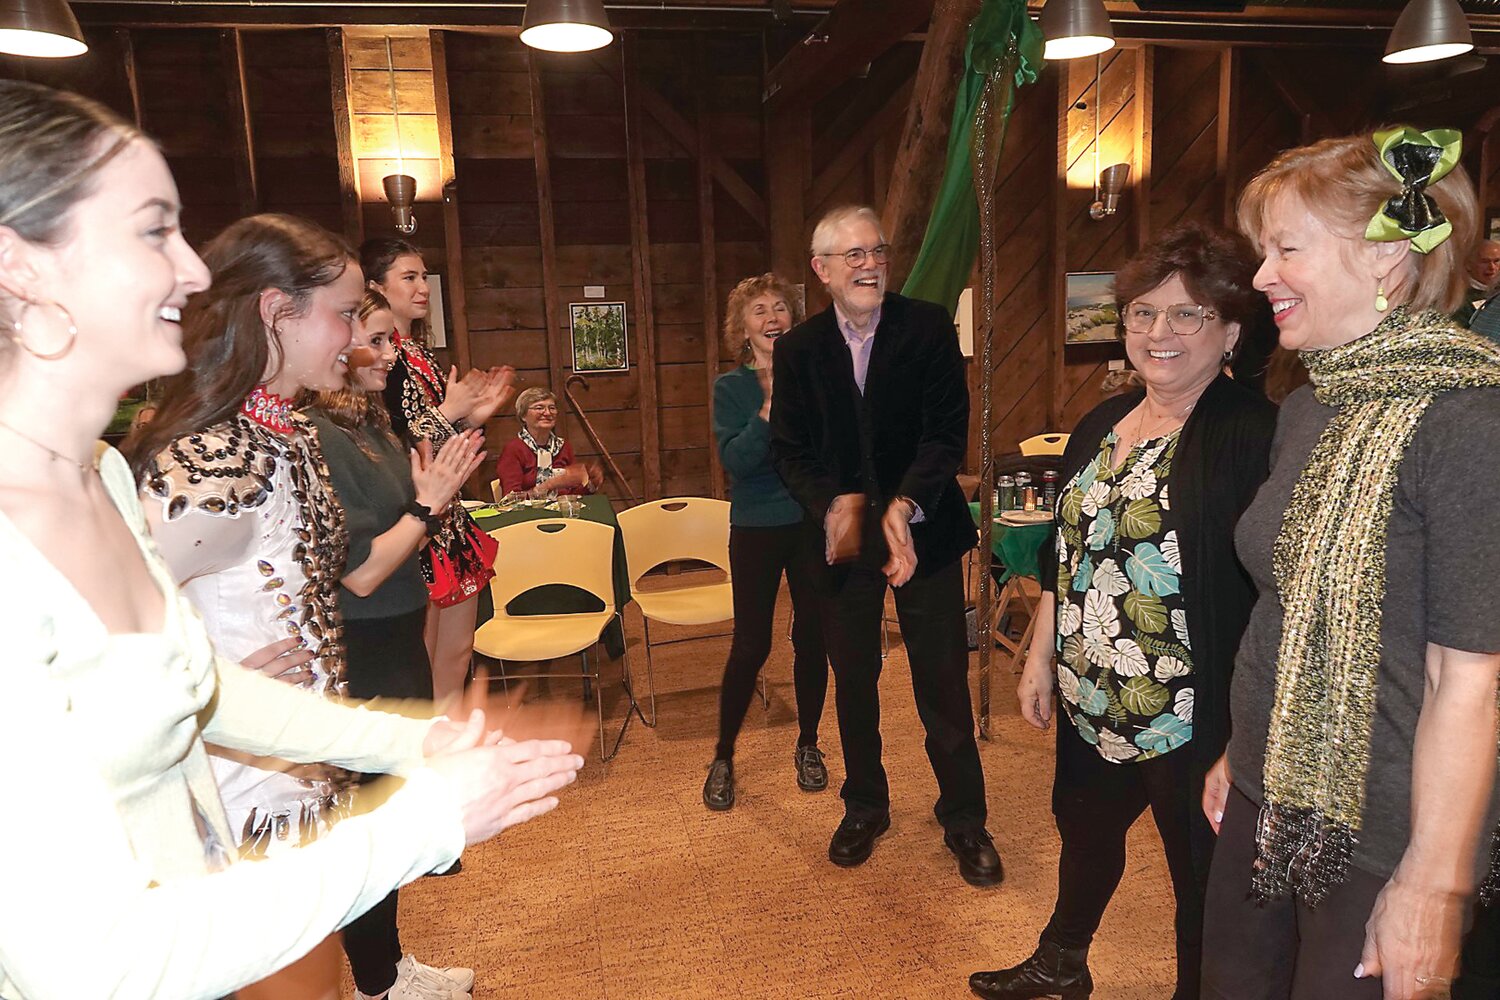 Guests enjoy an Irish dance with friends at the Celebrate the Green event last March.